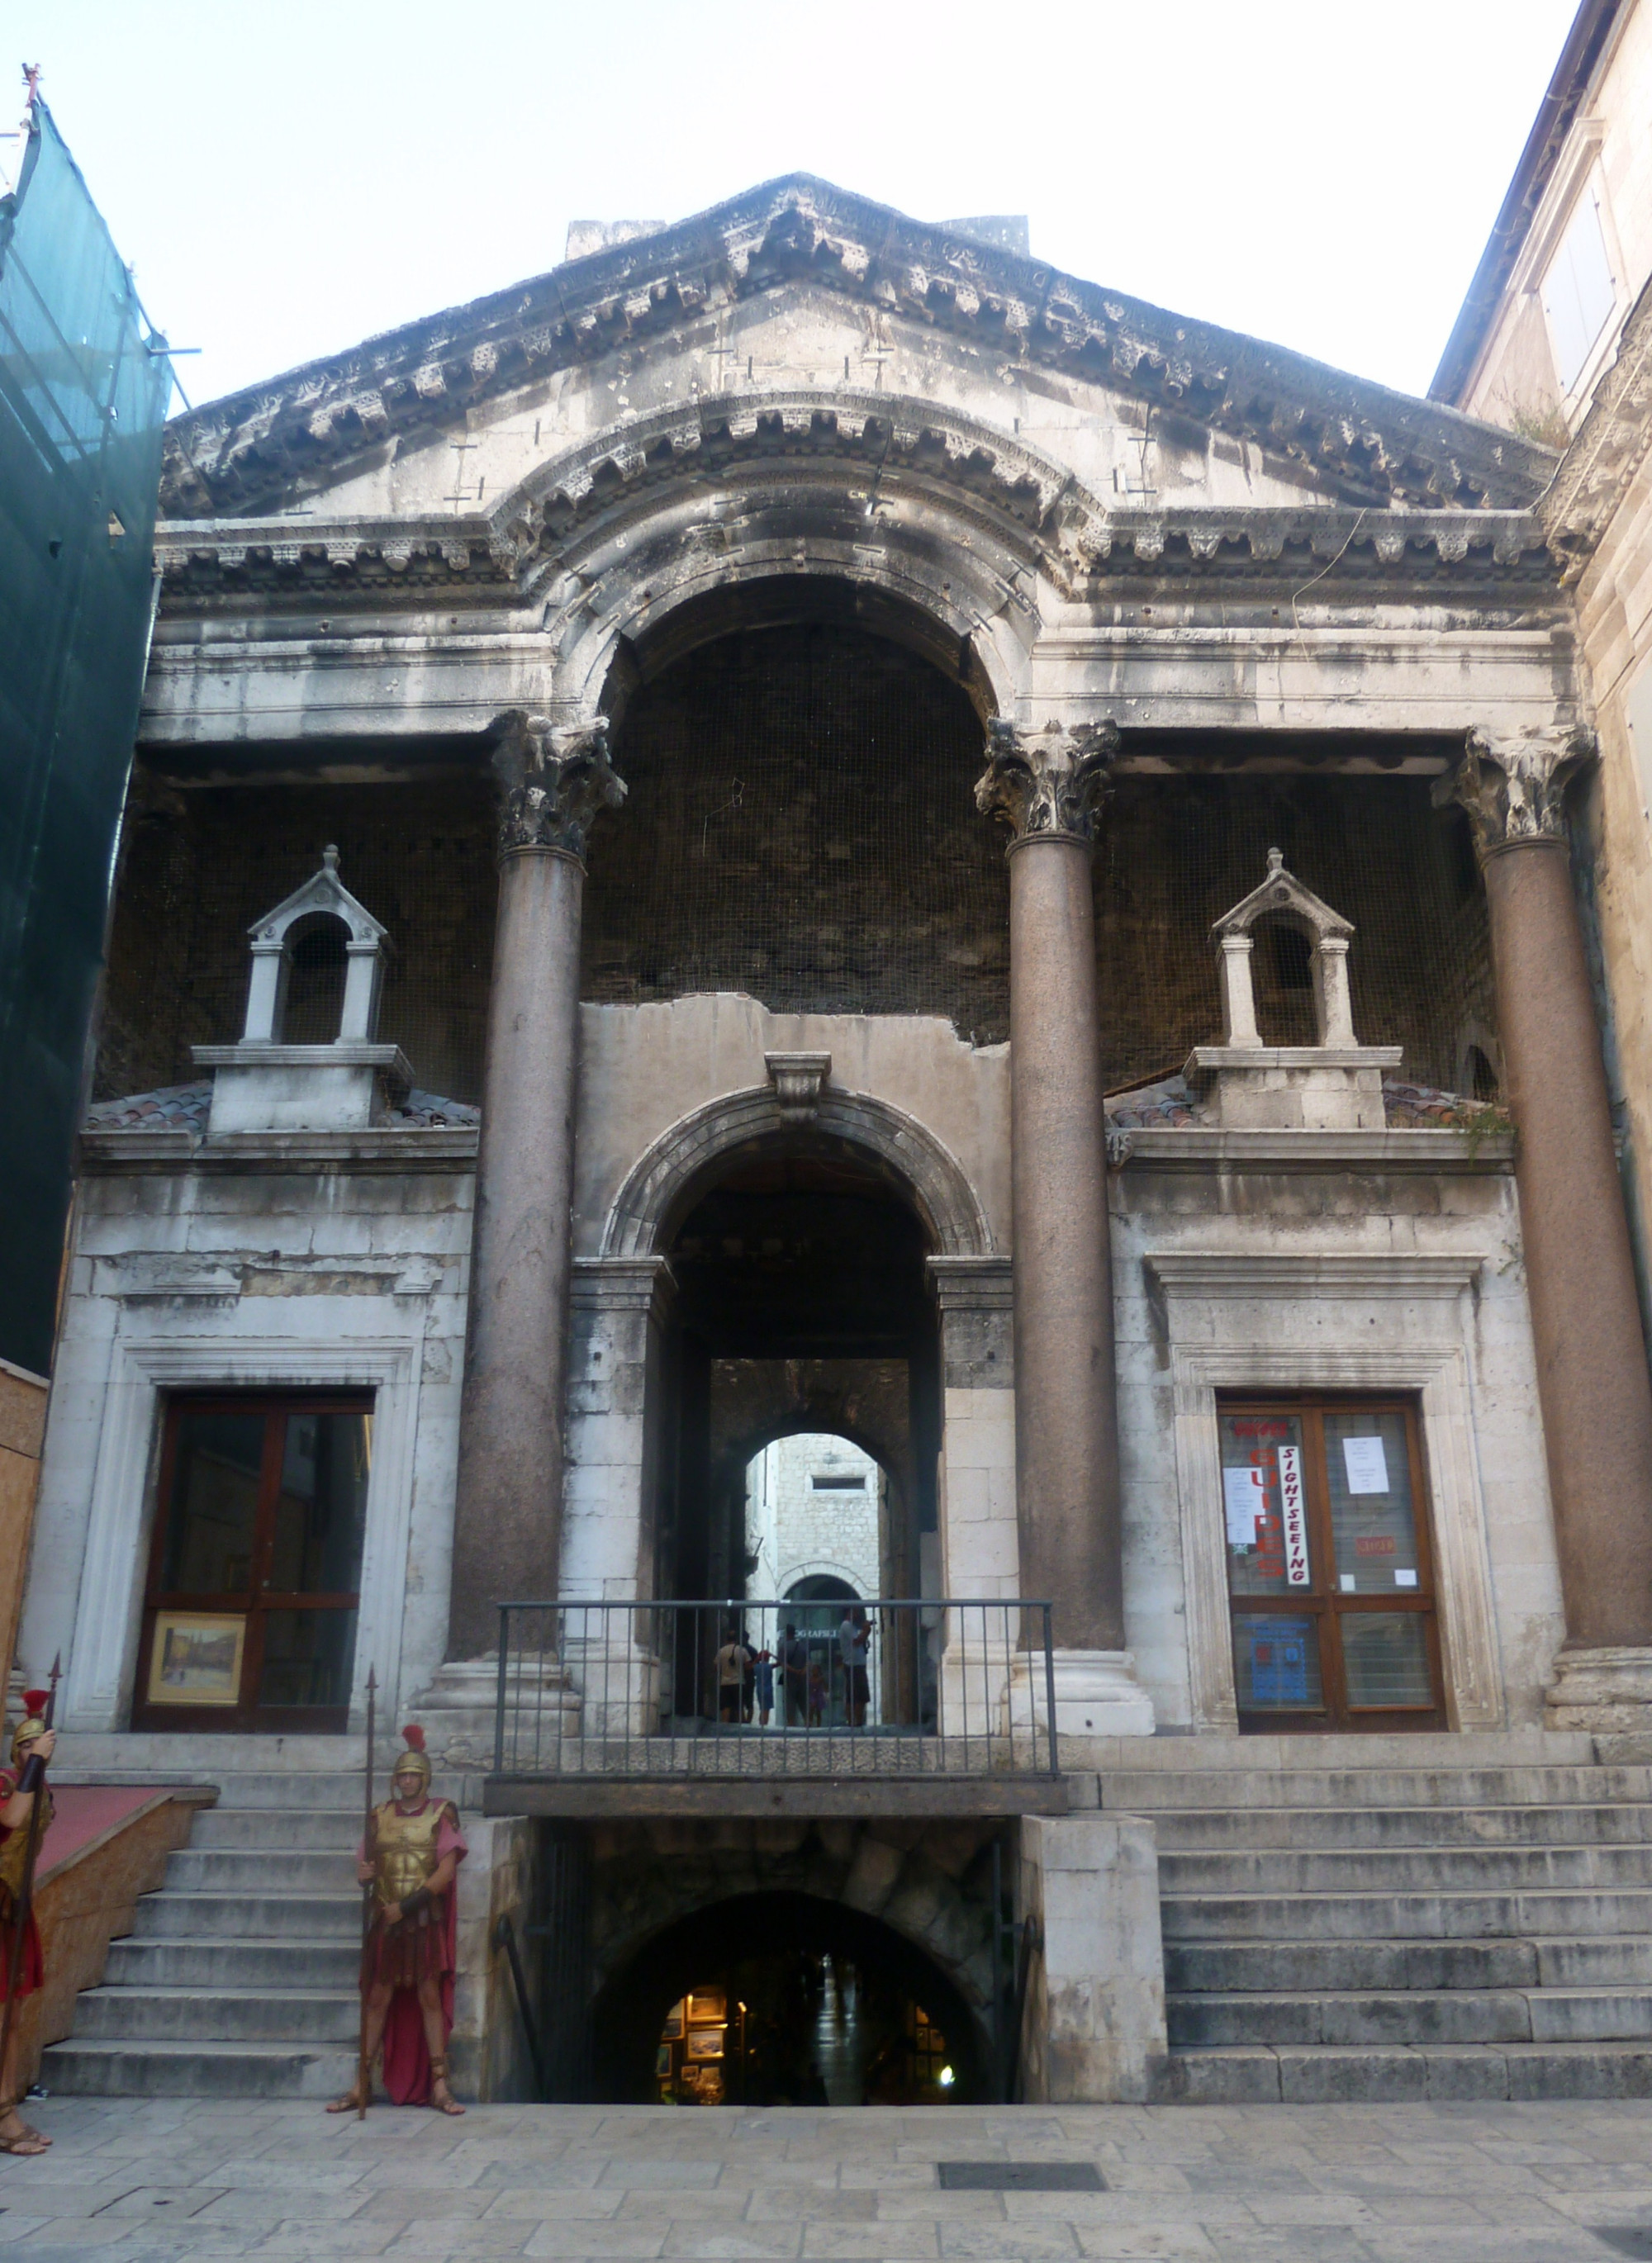 Peristyle of Diocletian's Palace 